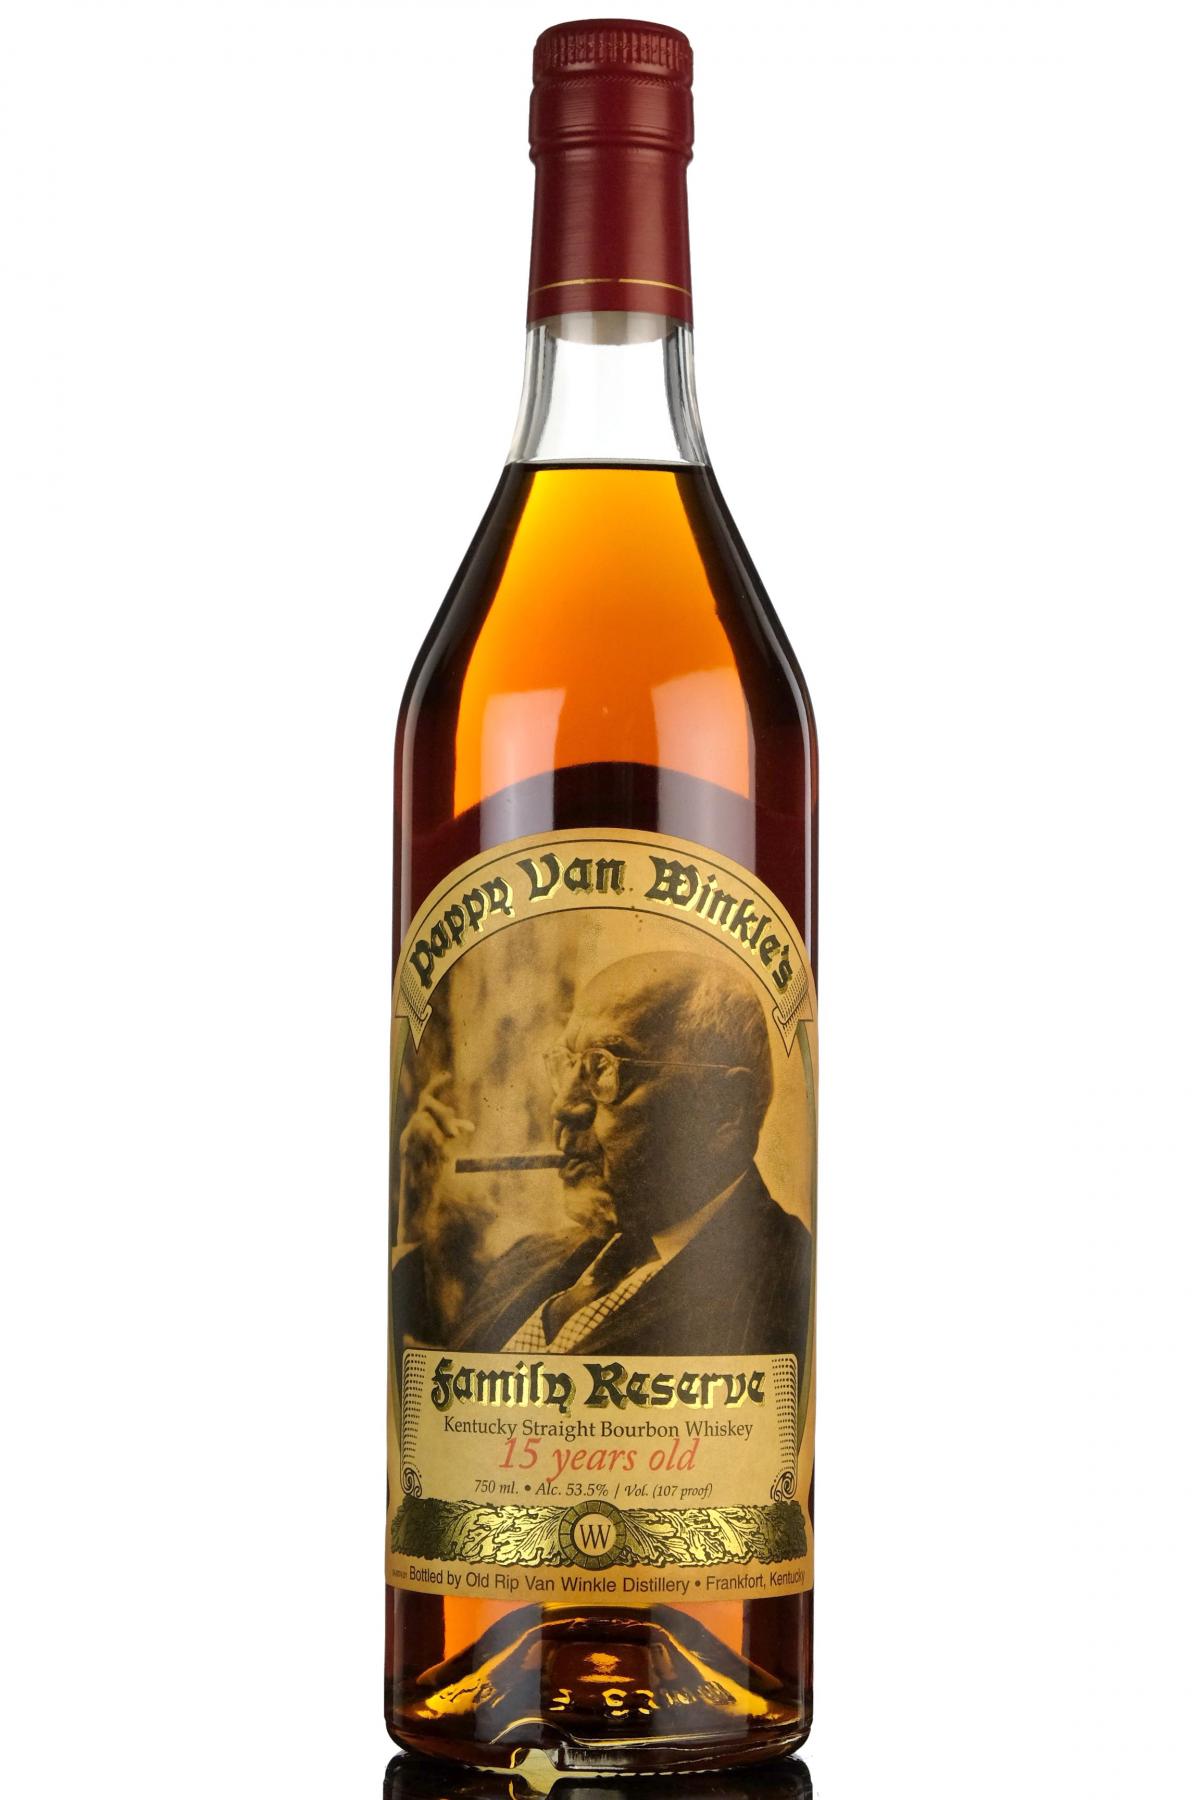 Pappy Van Winkles Family Reserve - 15 Year Old - Kentucky Straight Bourbon Whiskey